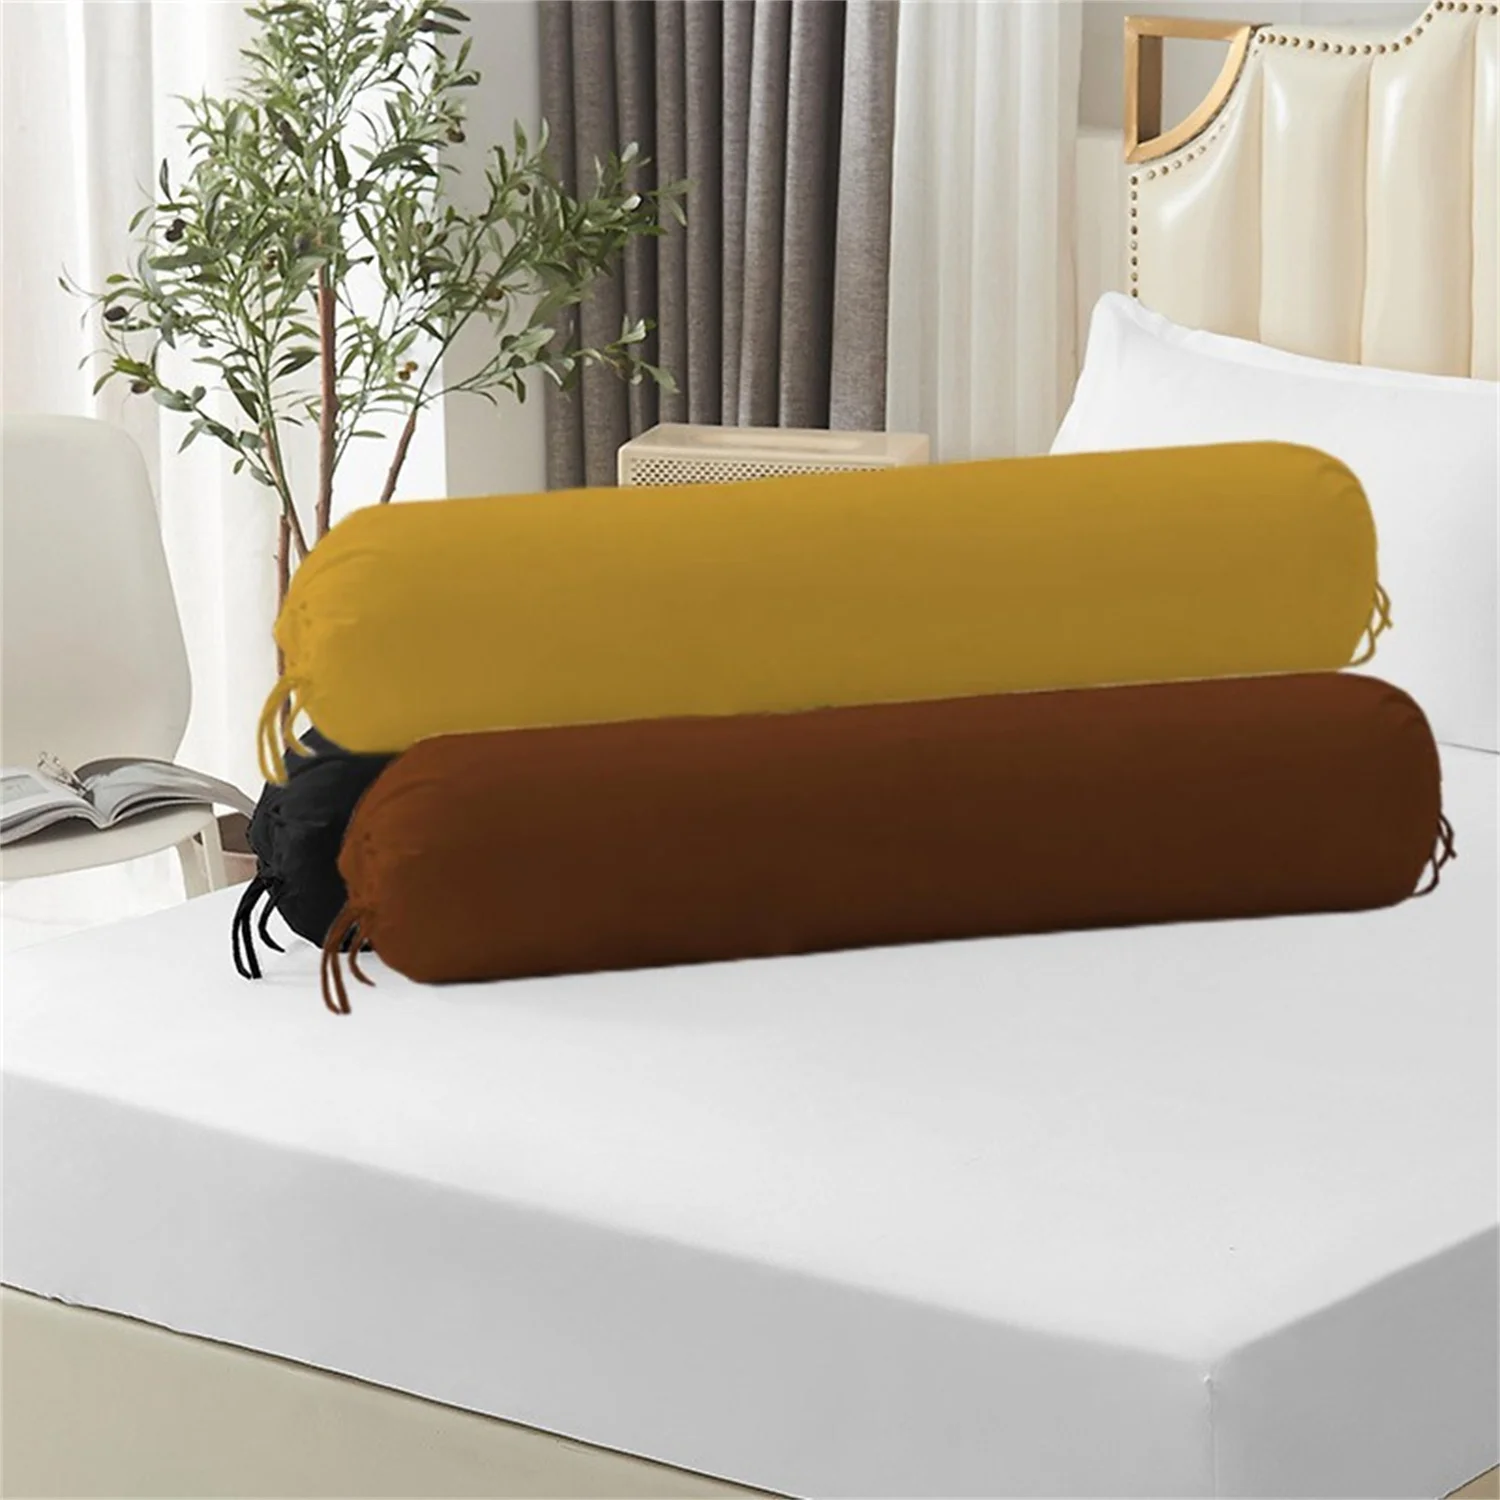 

Pure Color Polyester Strip Pillow Cylindrical Bed Sleeping Waist Cushion Removable Washable Candy Bolster Home Decor